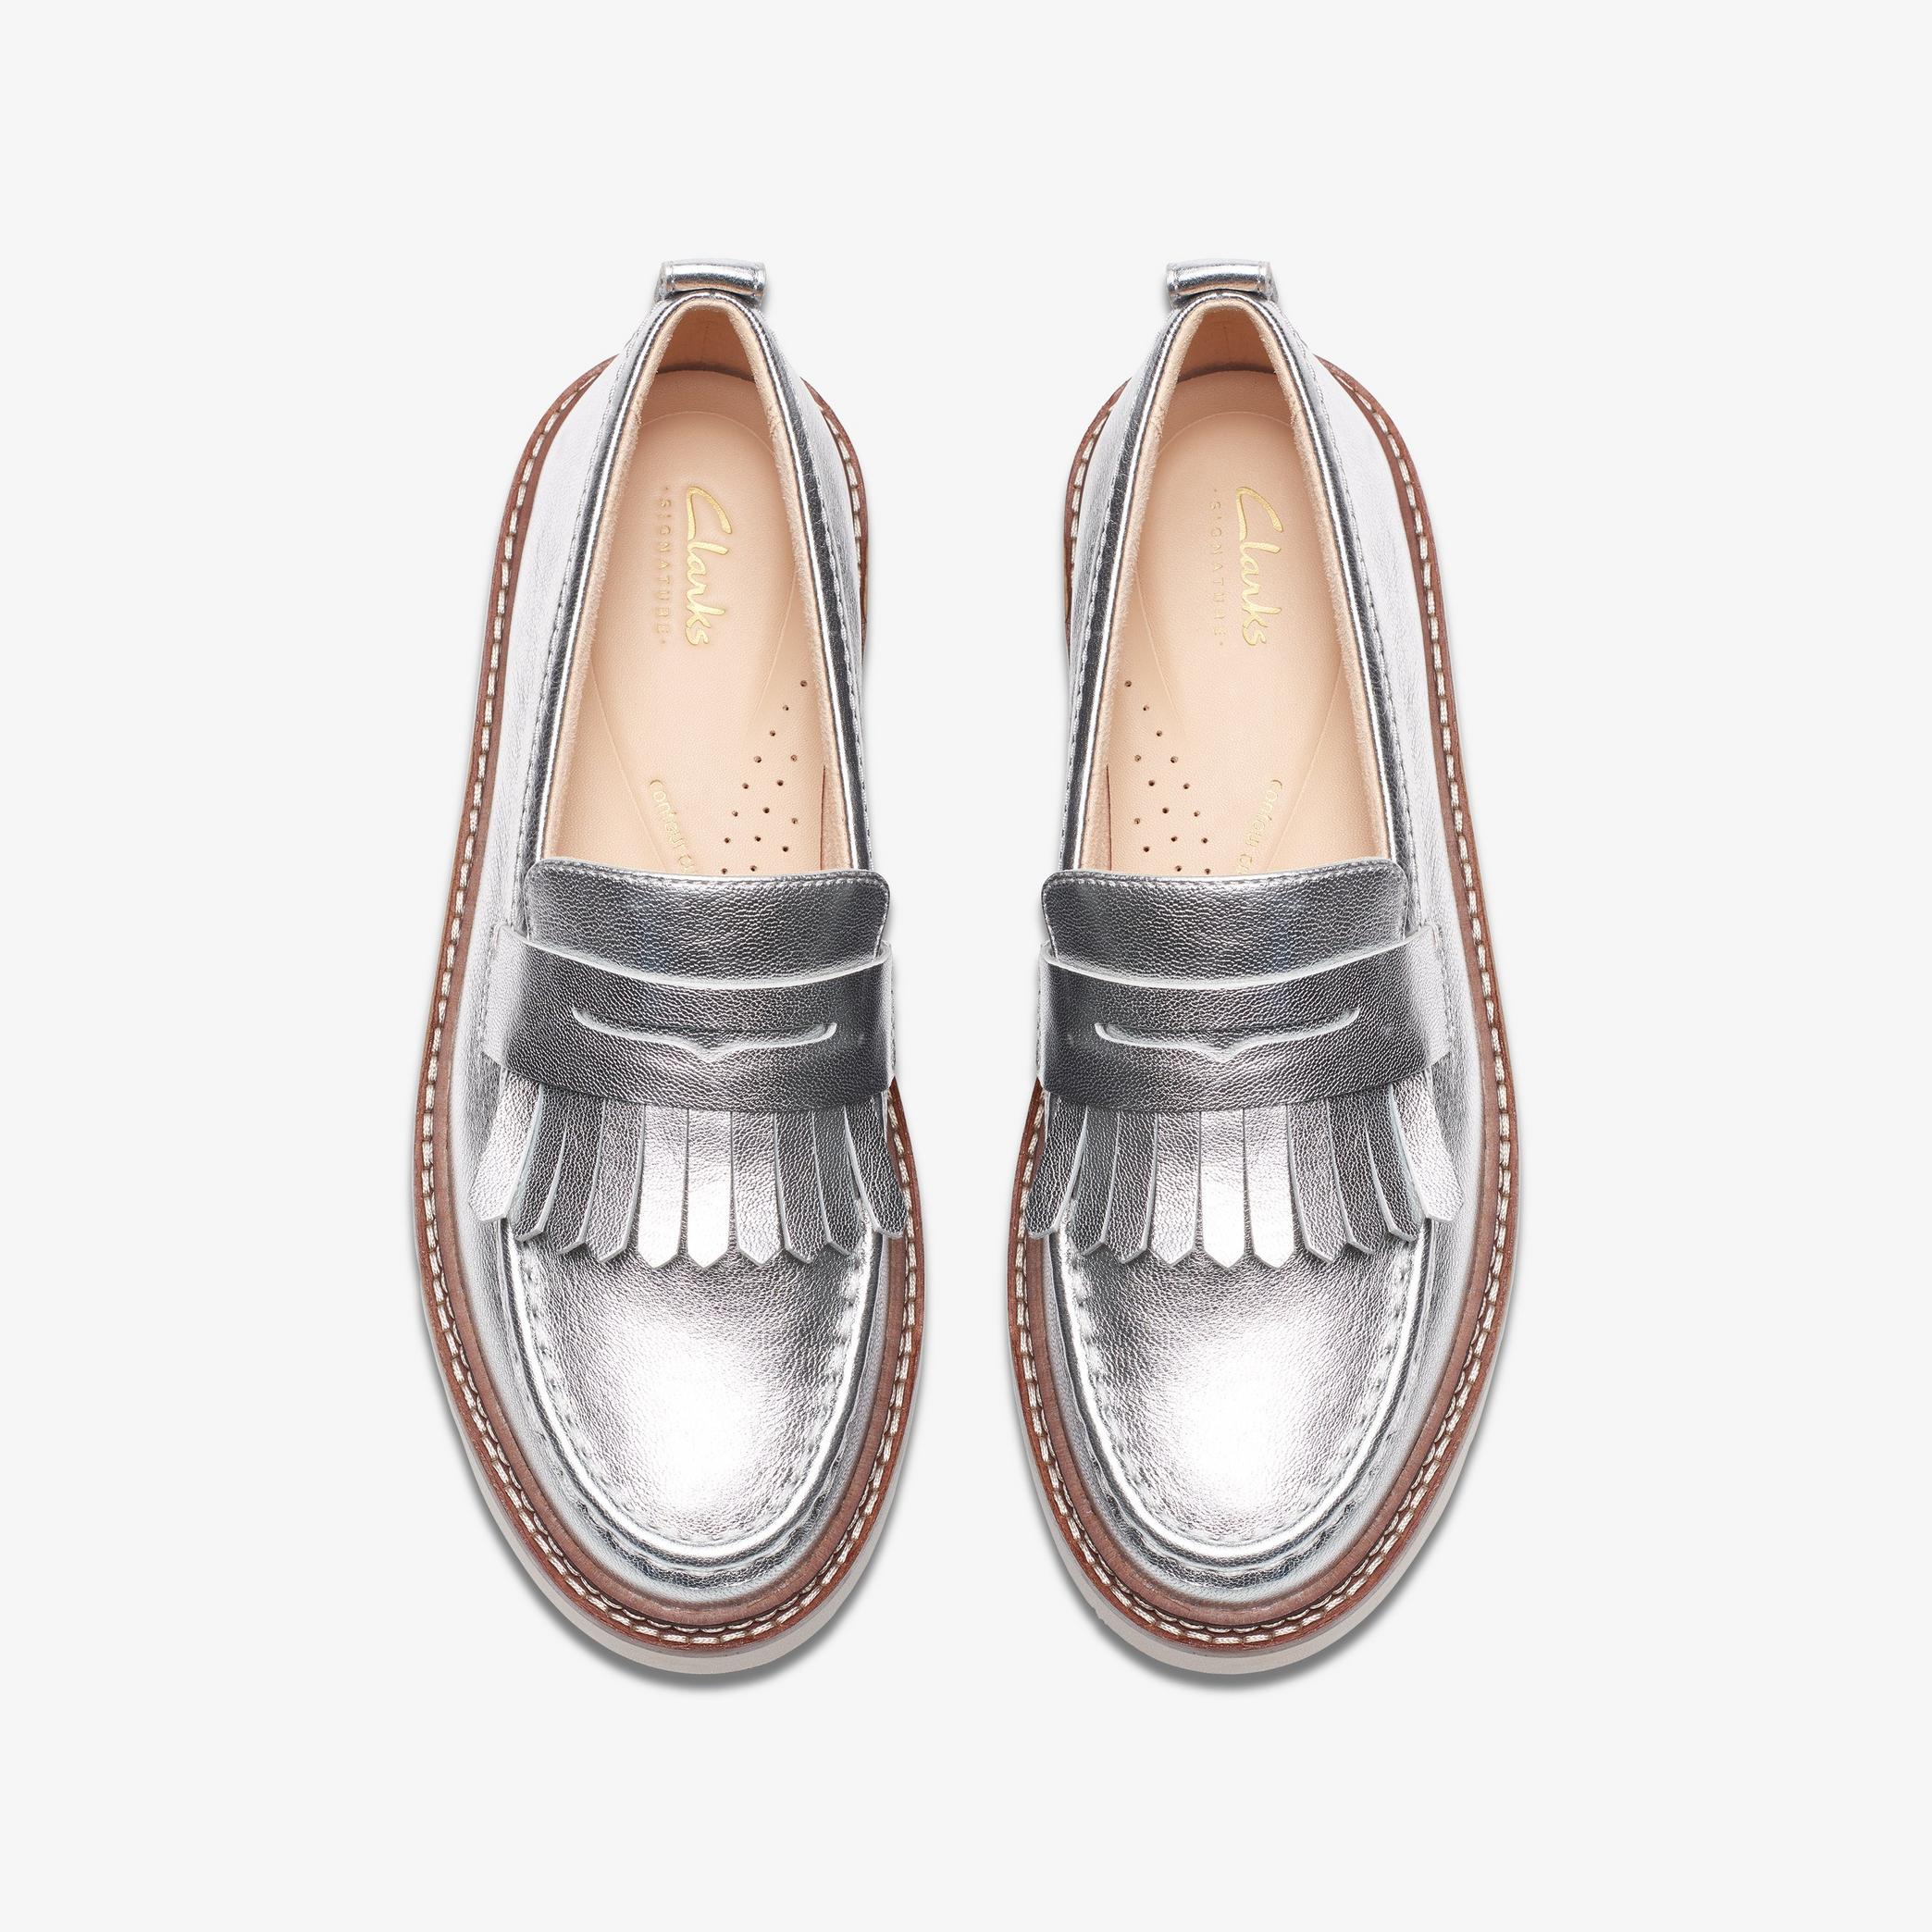 Orianna Loafer Silver Metallic Loafers, view 6 of 6